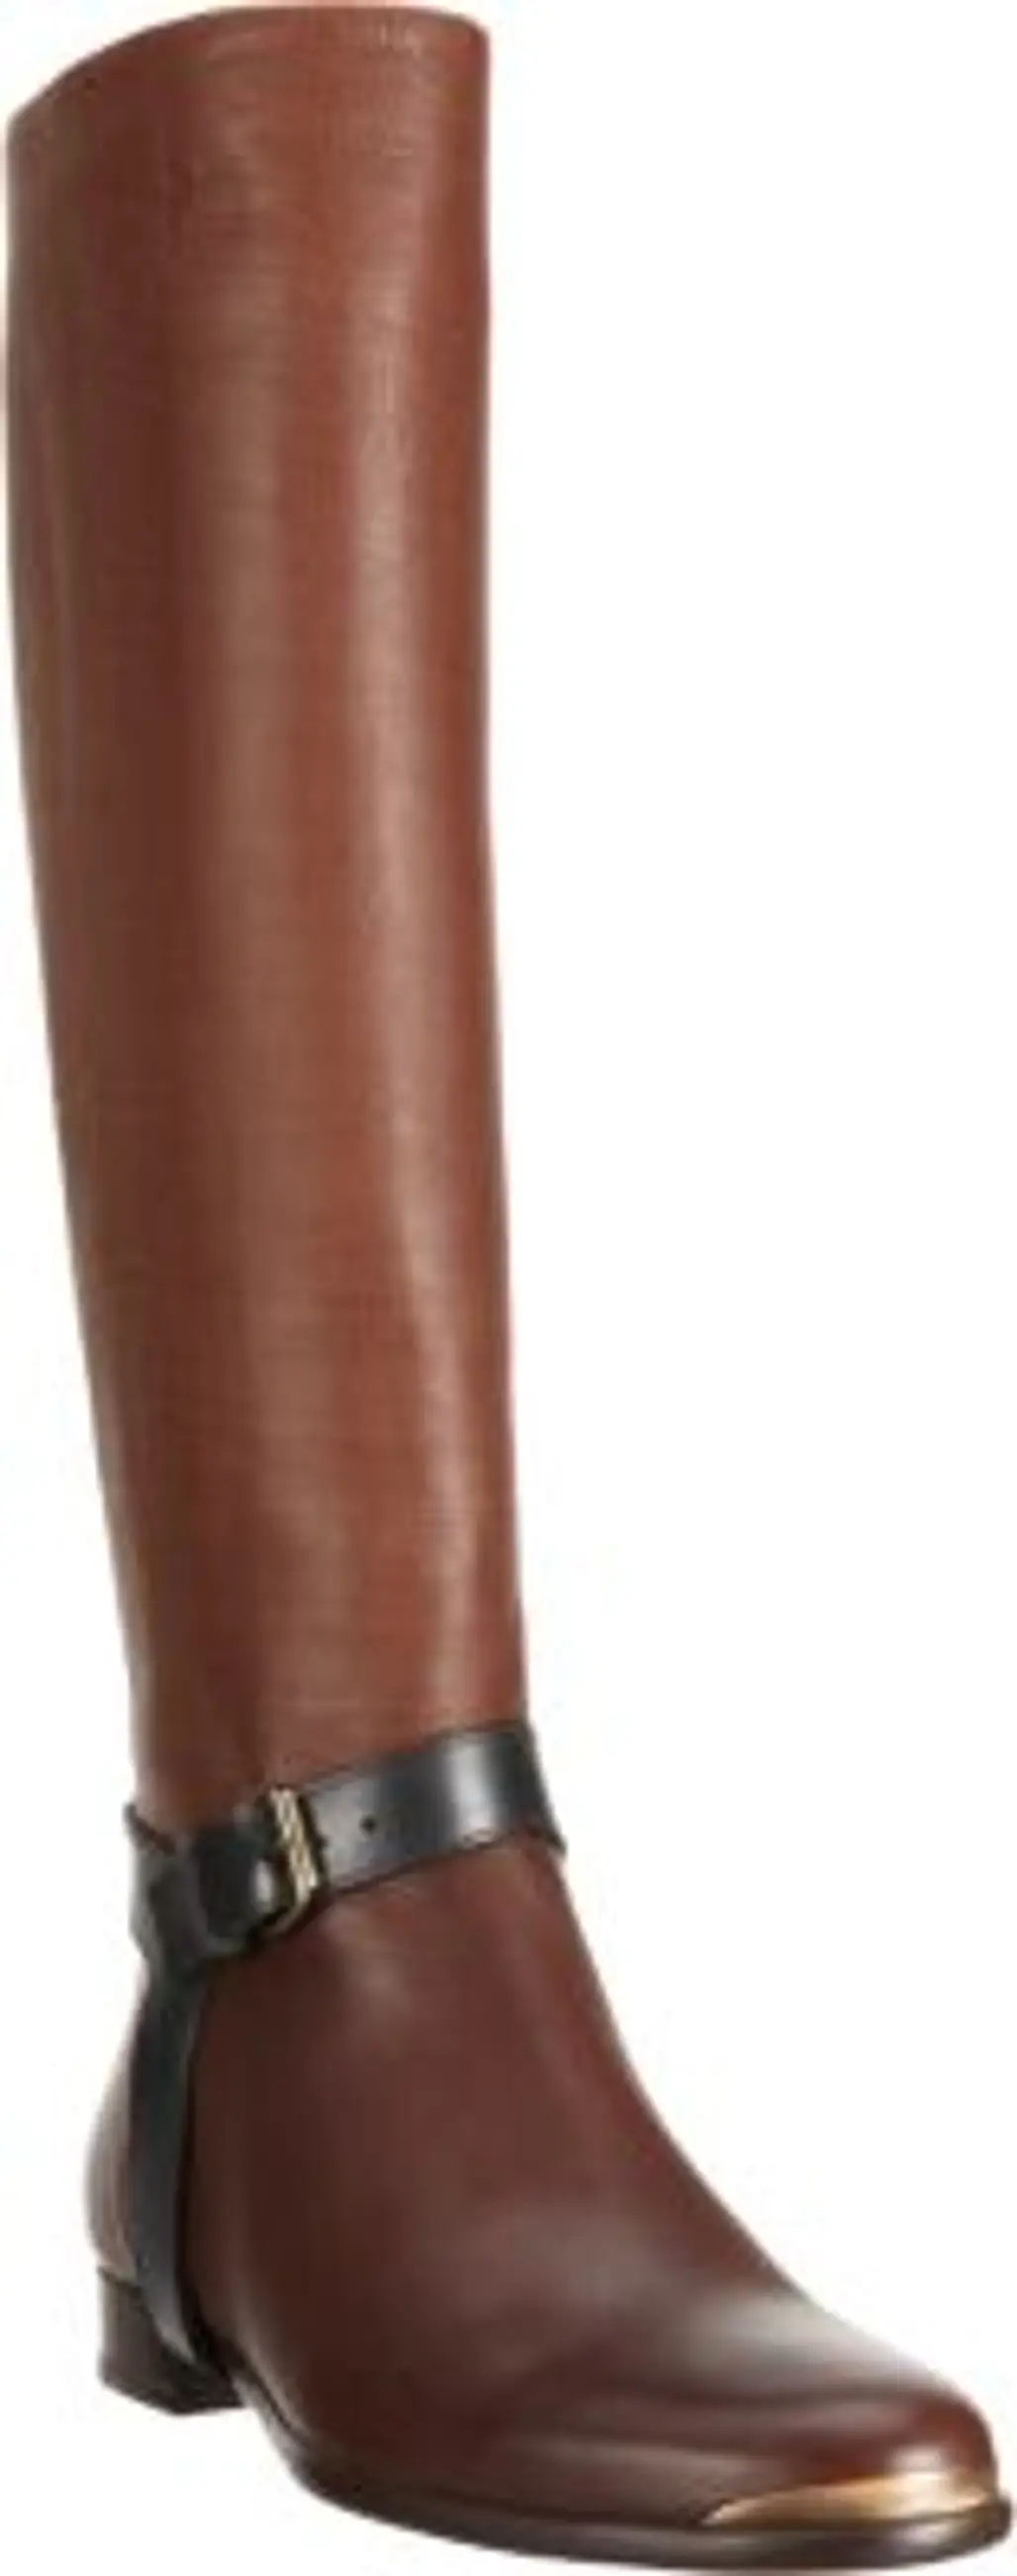 Equestrian Riding Boots